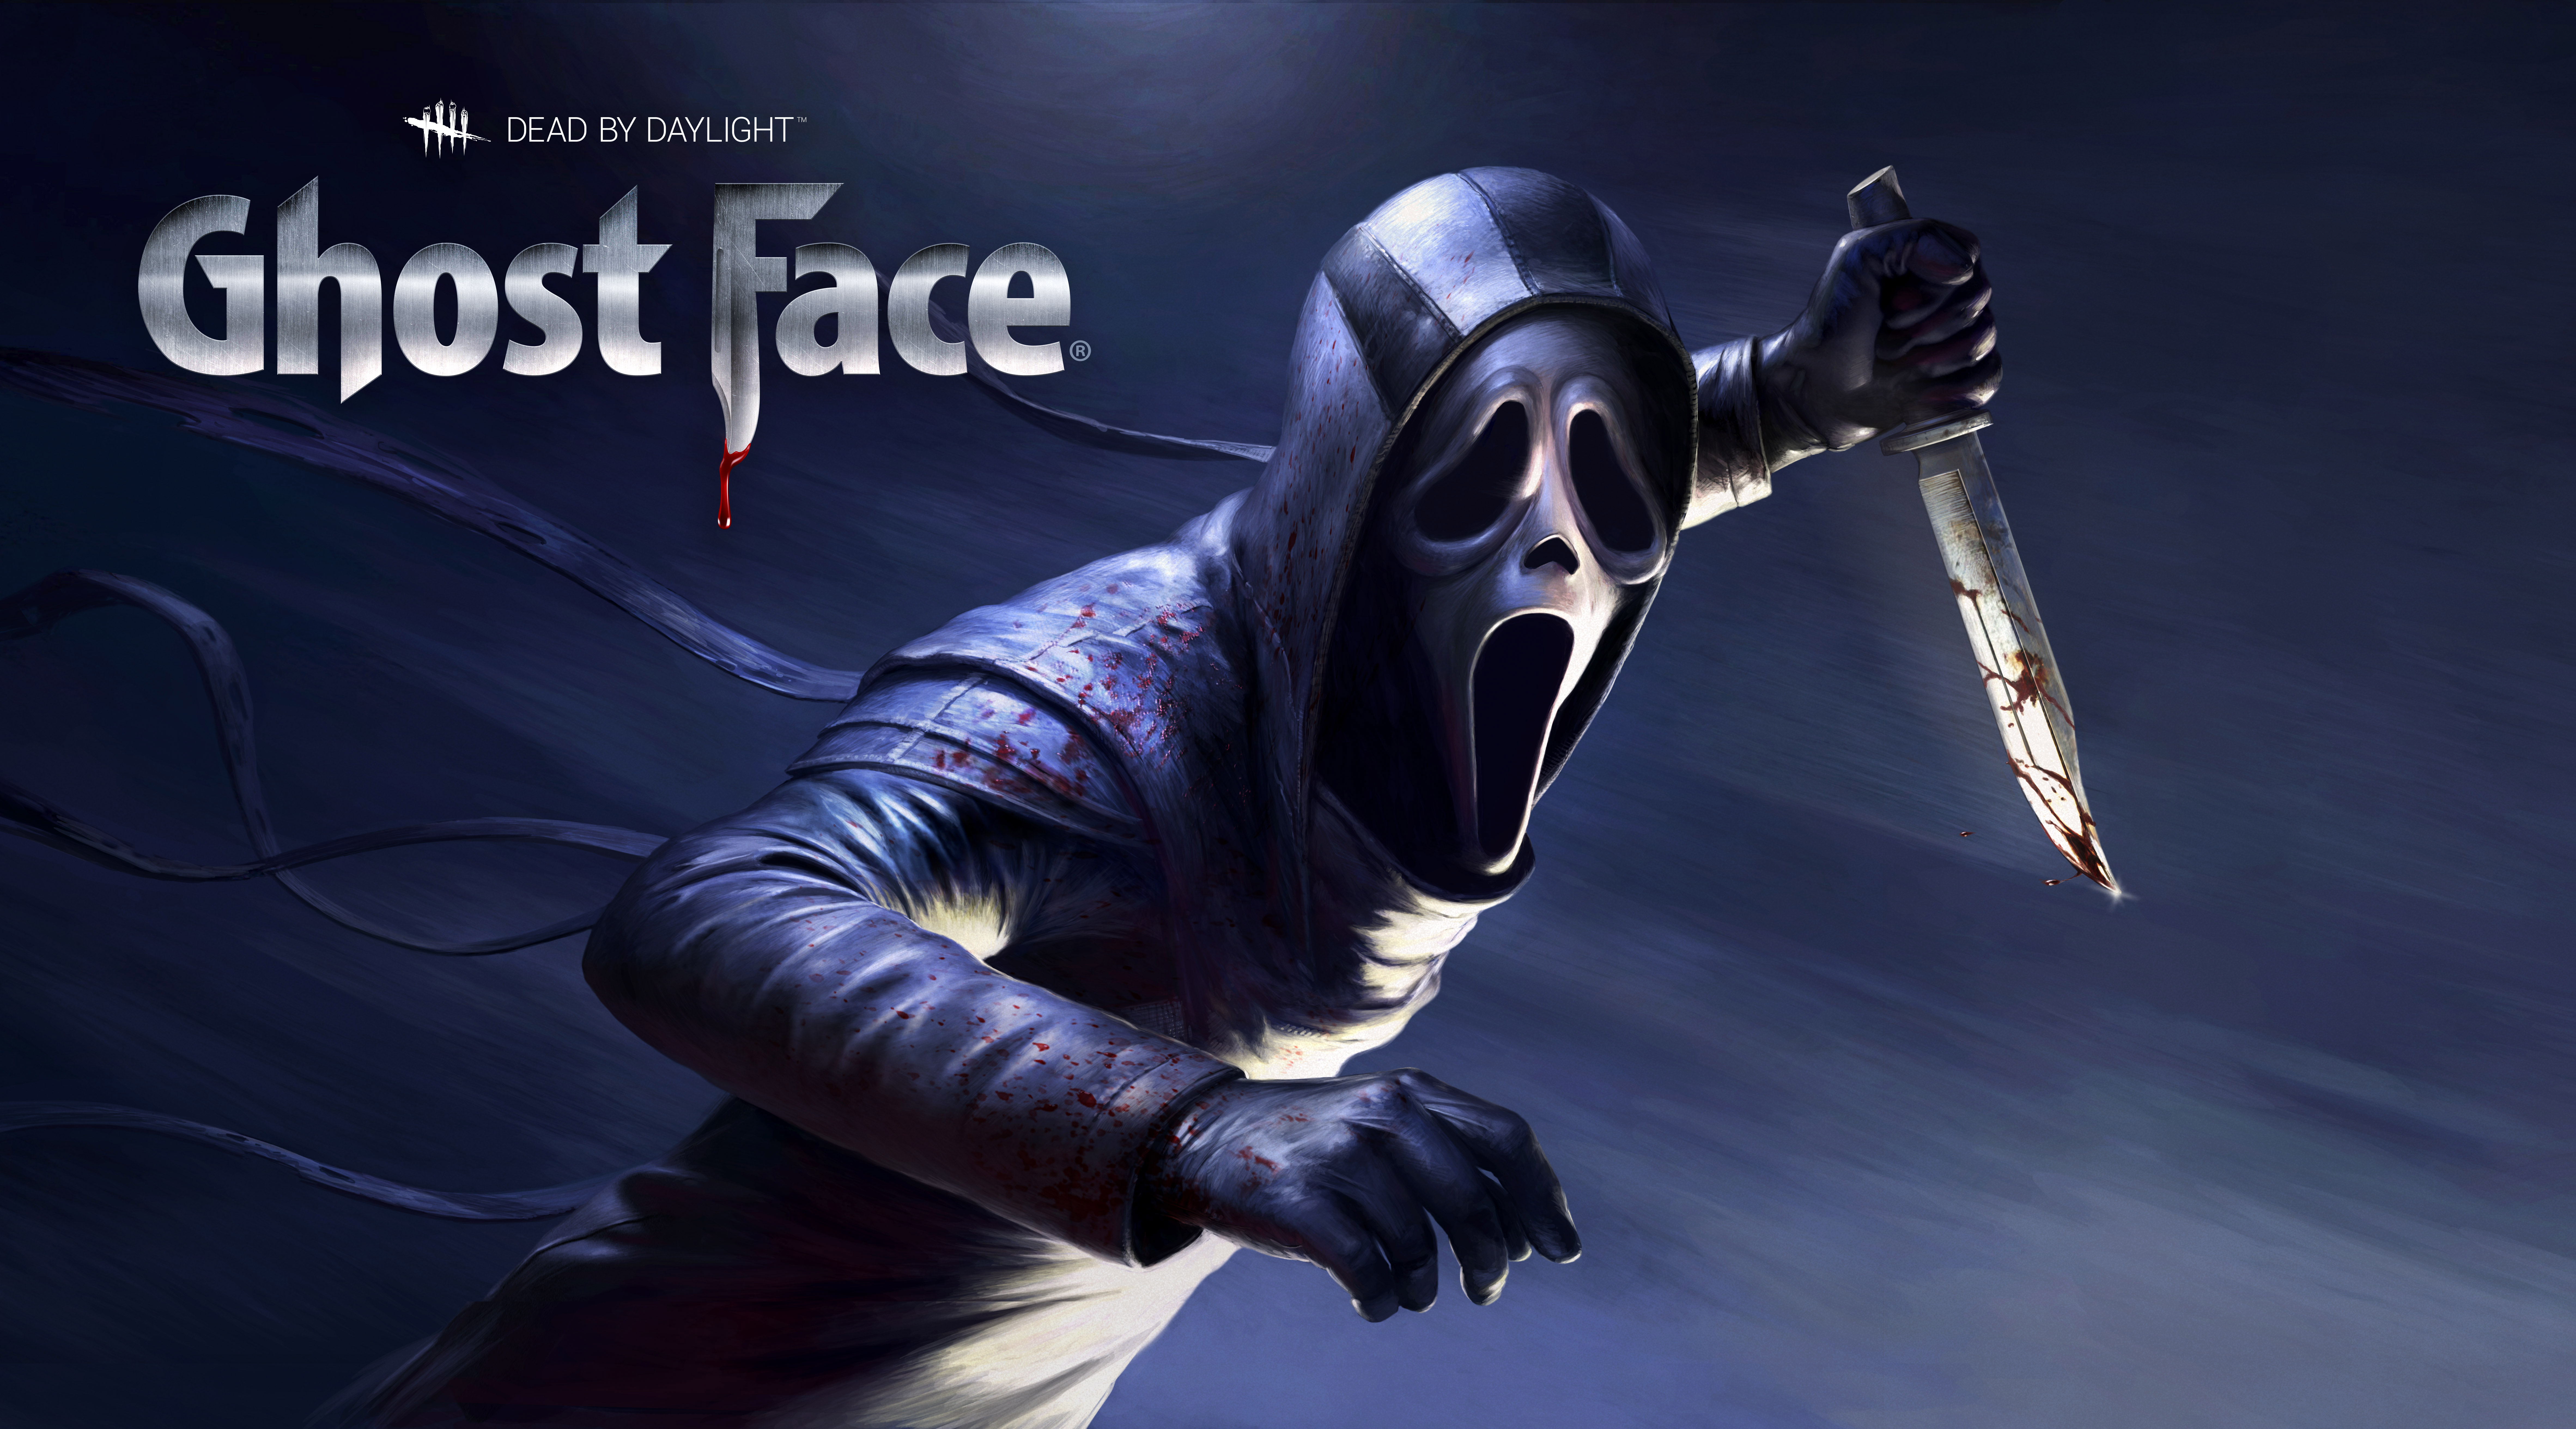 344283 Ghost Face Ghostface Dead by Daylight Video Game 4k  Rare  Gallery HD Wallpapers